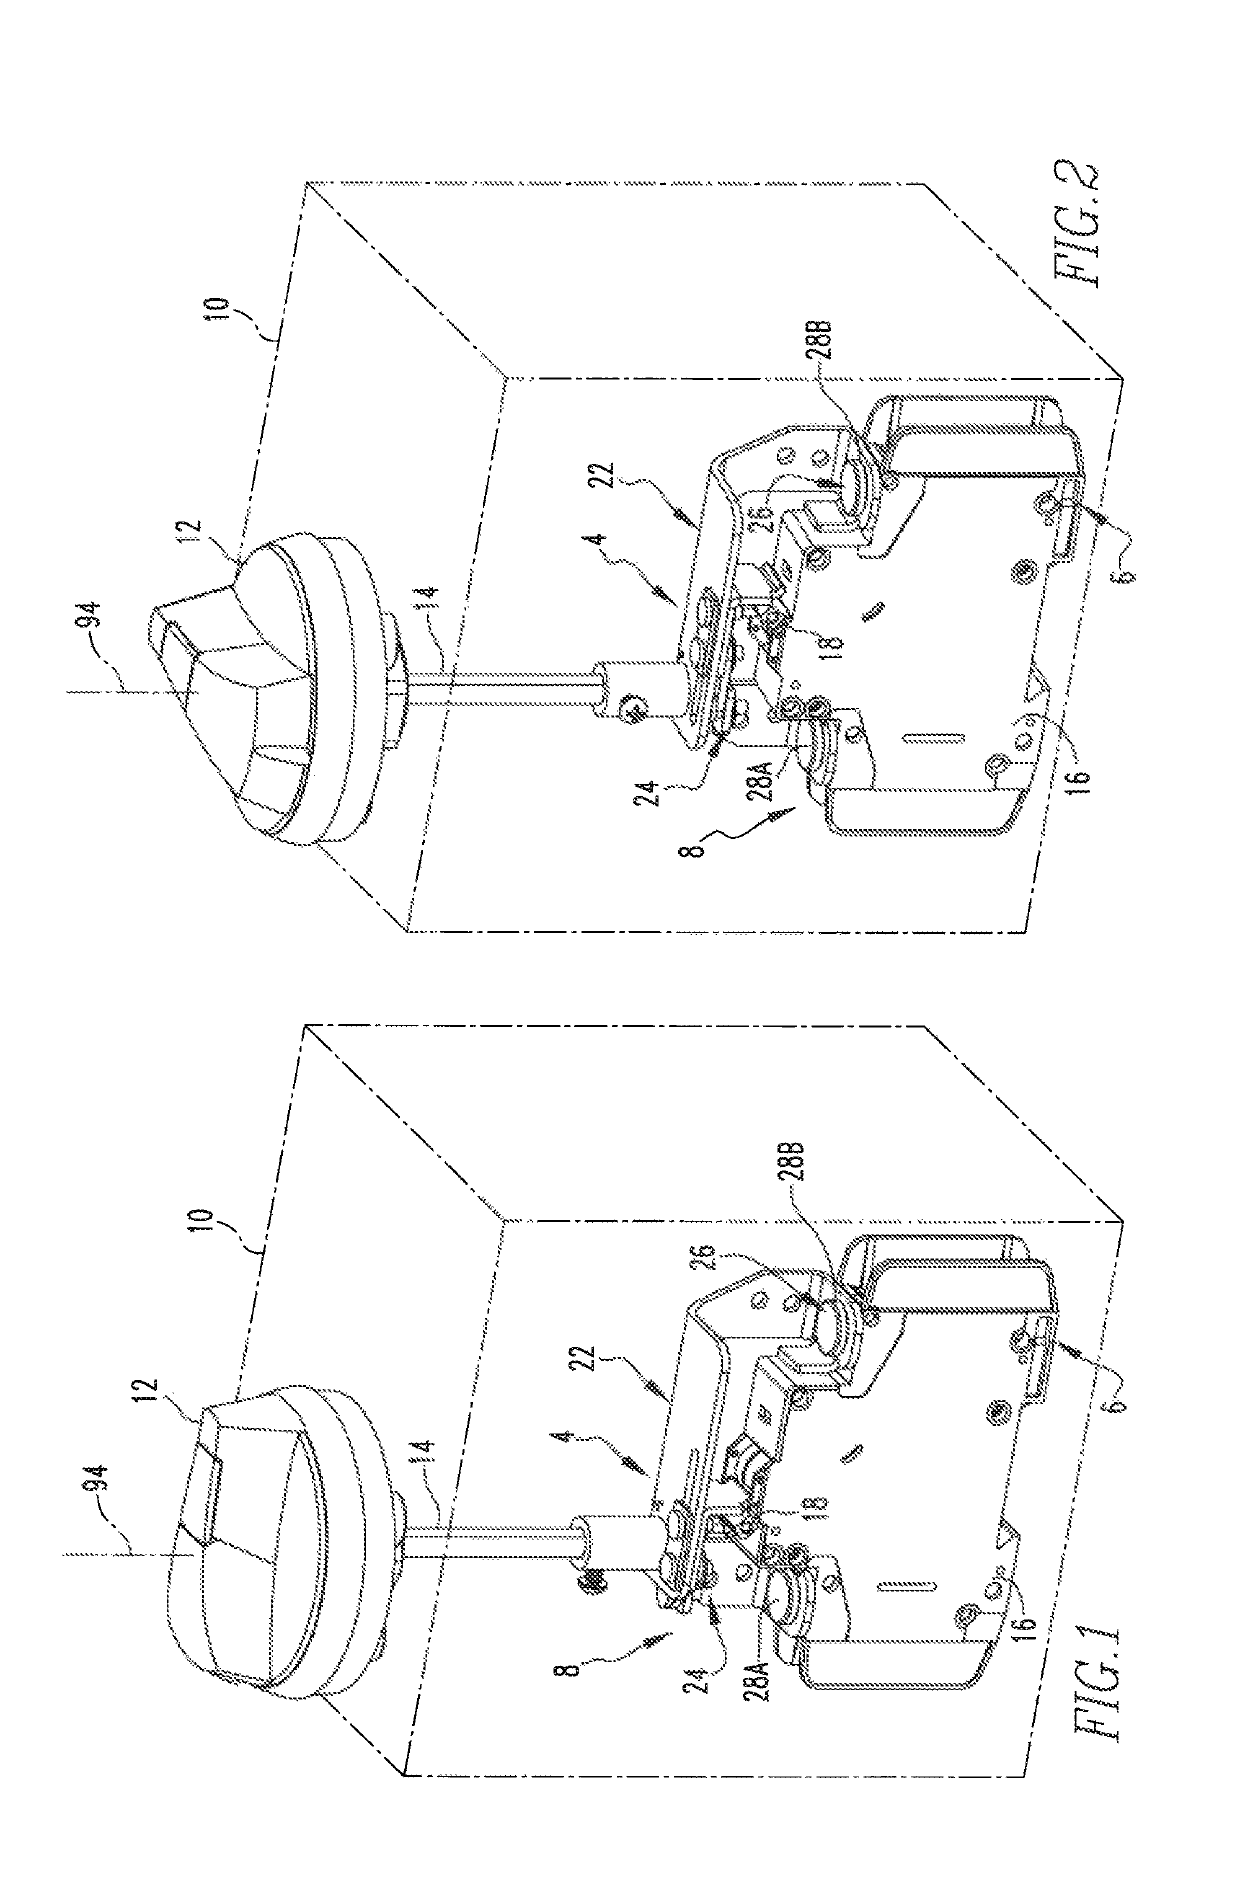 Rotary motion switching apparatus usable with circuit interrupter